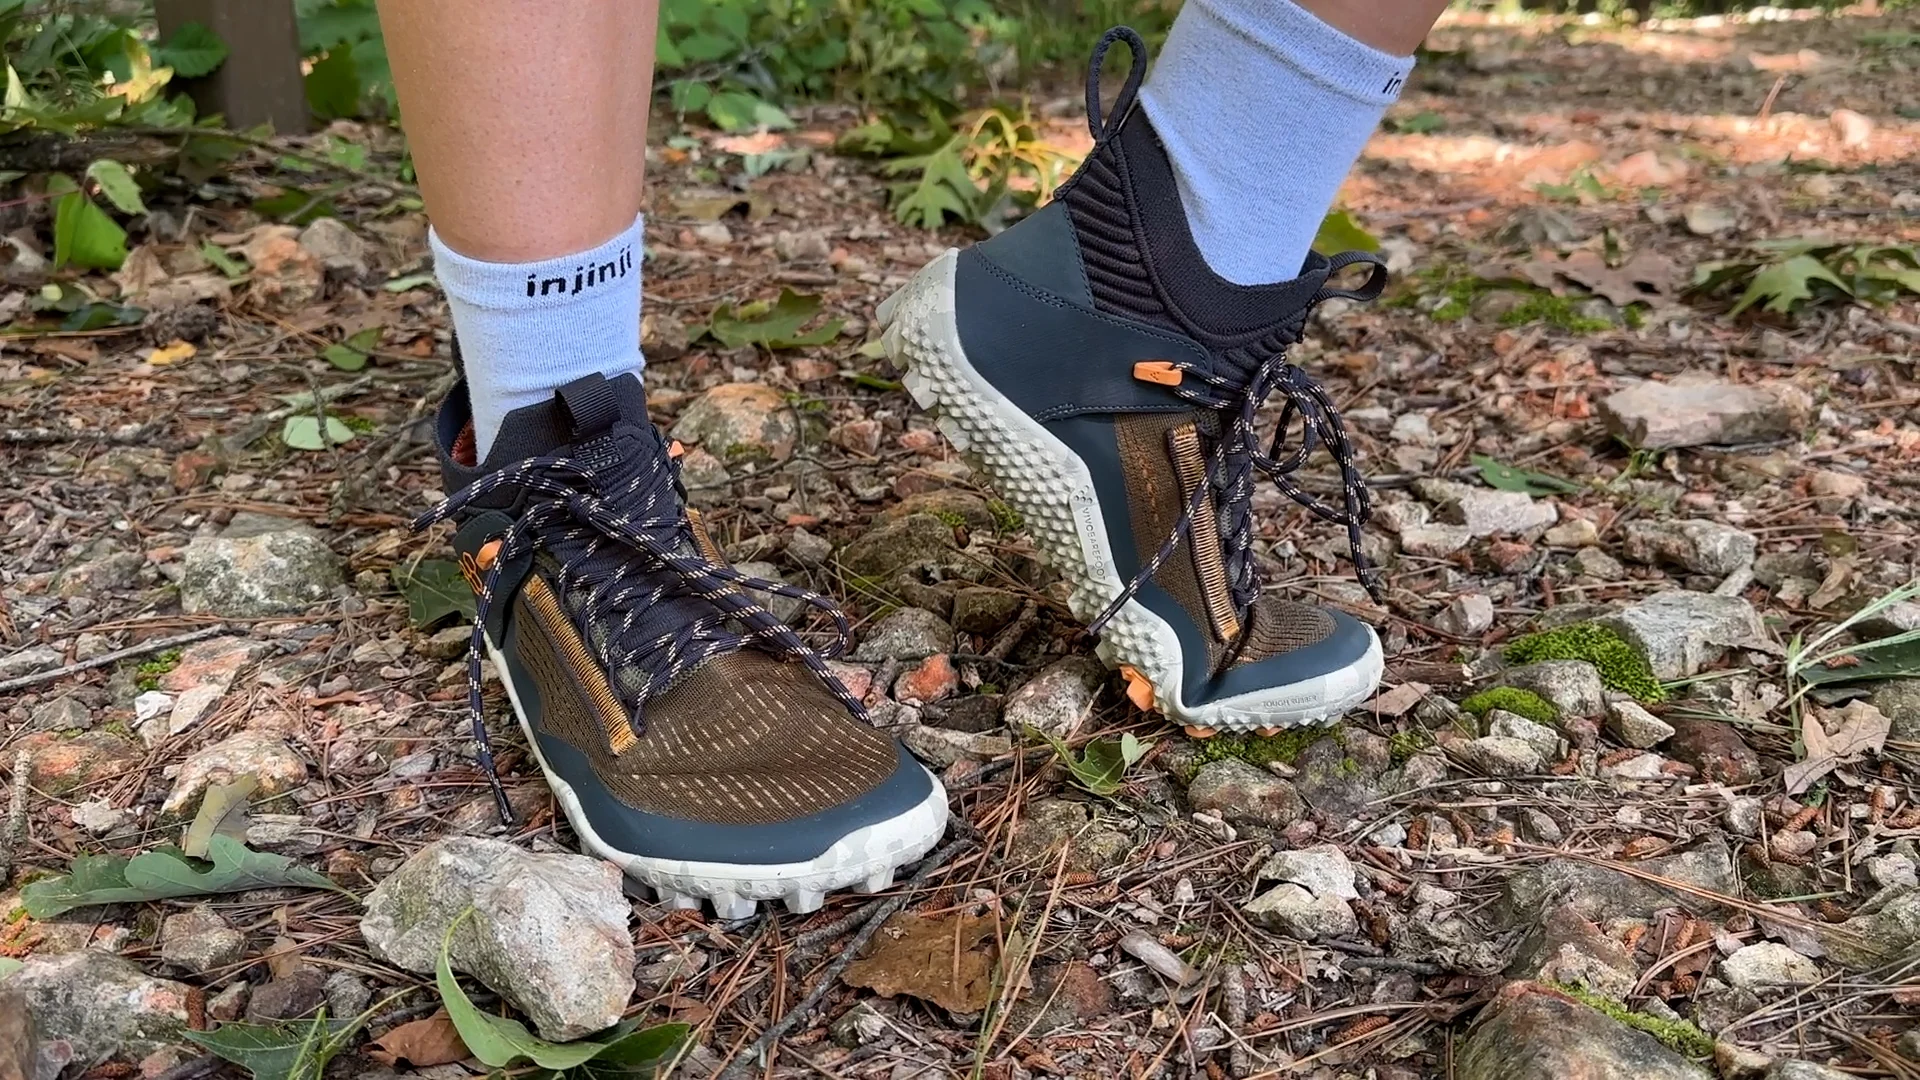 Never Tie Your Hiking Shoes Again